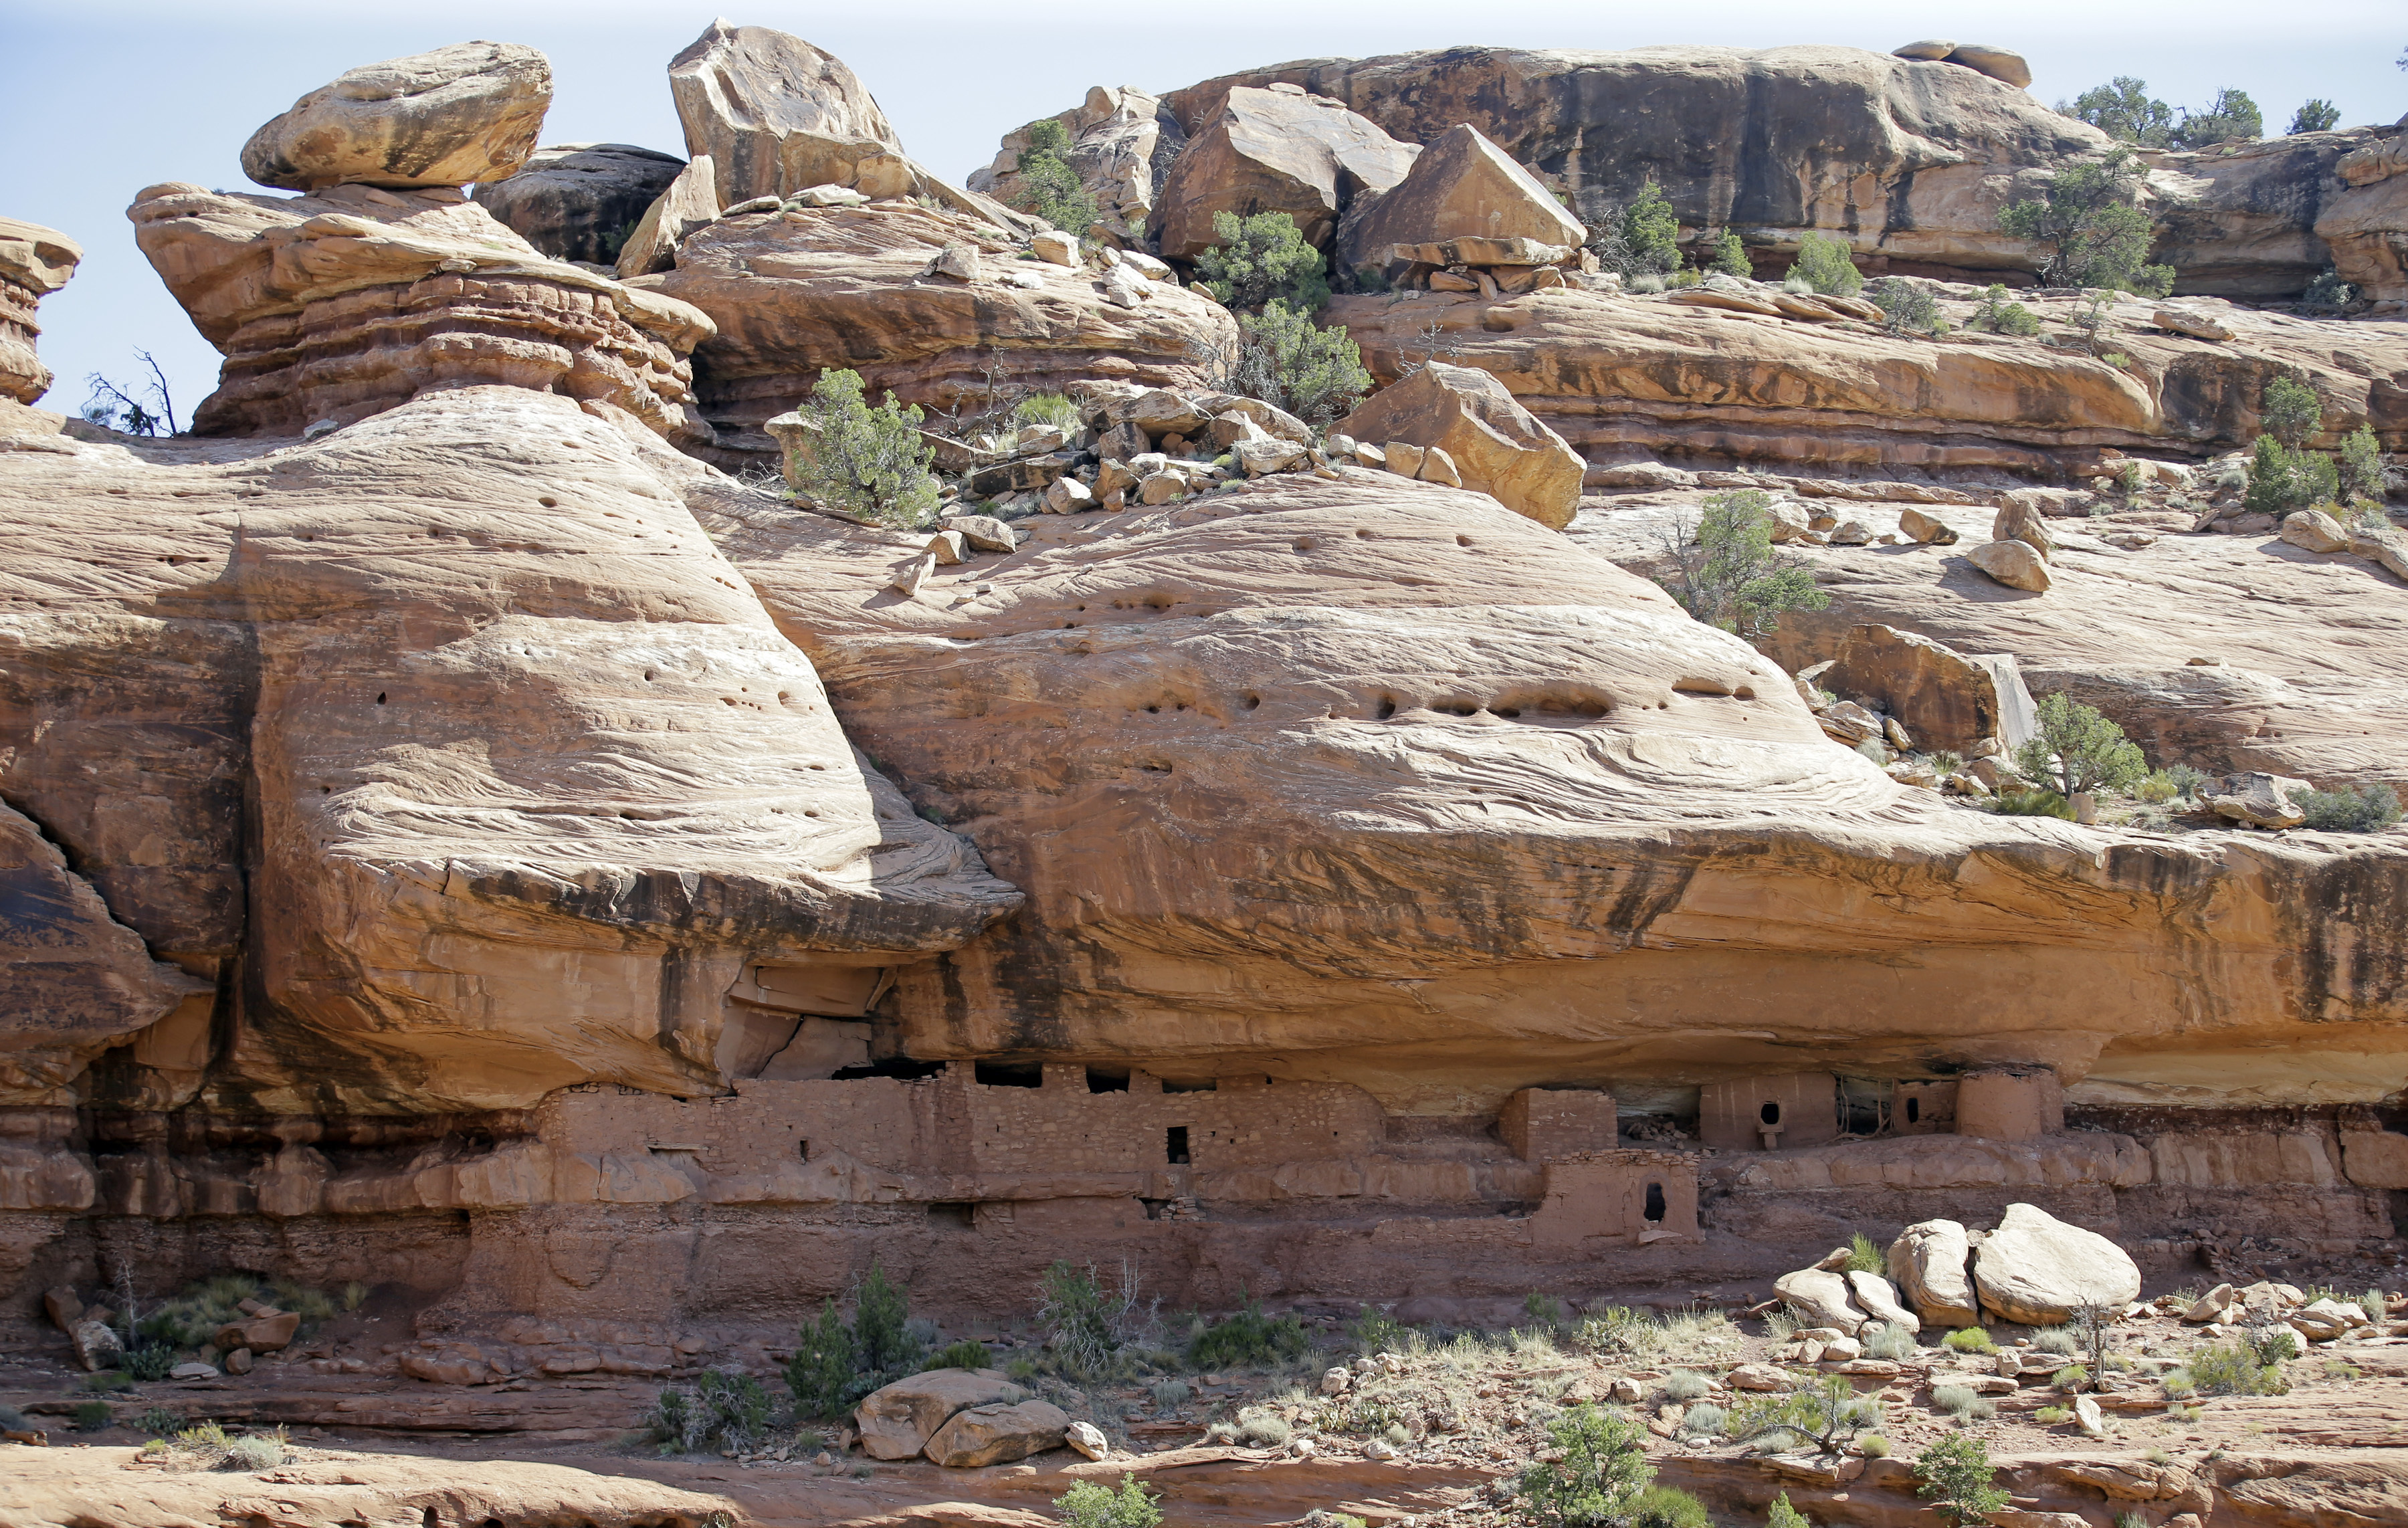 The Moon House is a stunning structure created by the Ancestral Puebloans in the 13th century. It's located on Cedar Mesa, in the McCloyd Canyon, part of the new Bears Ears monument.